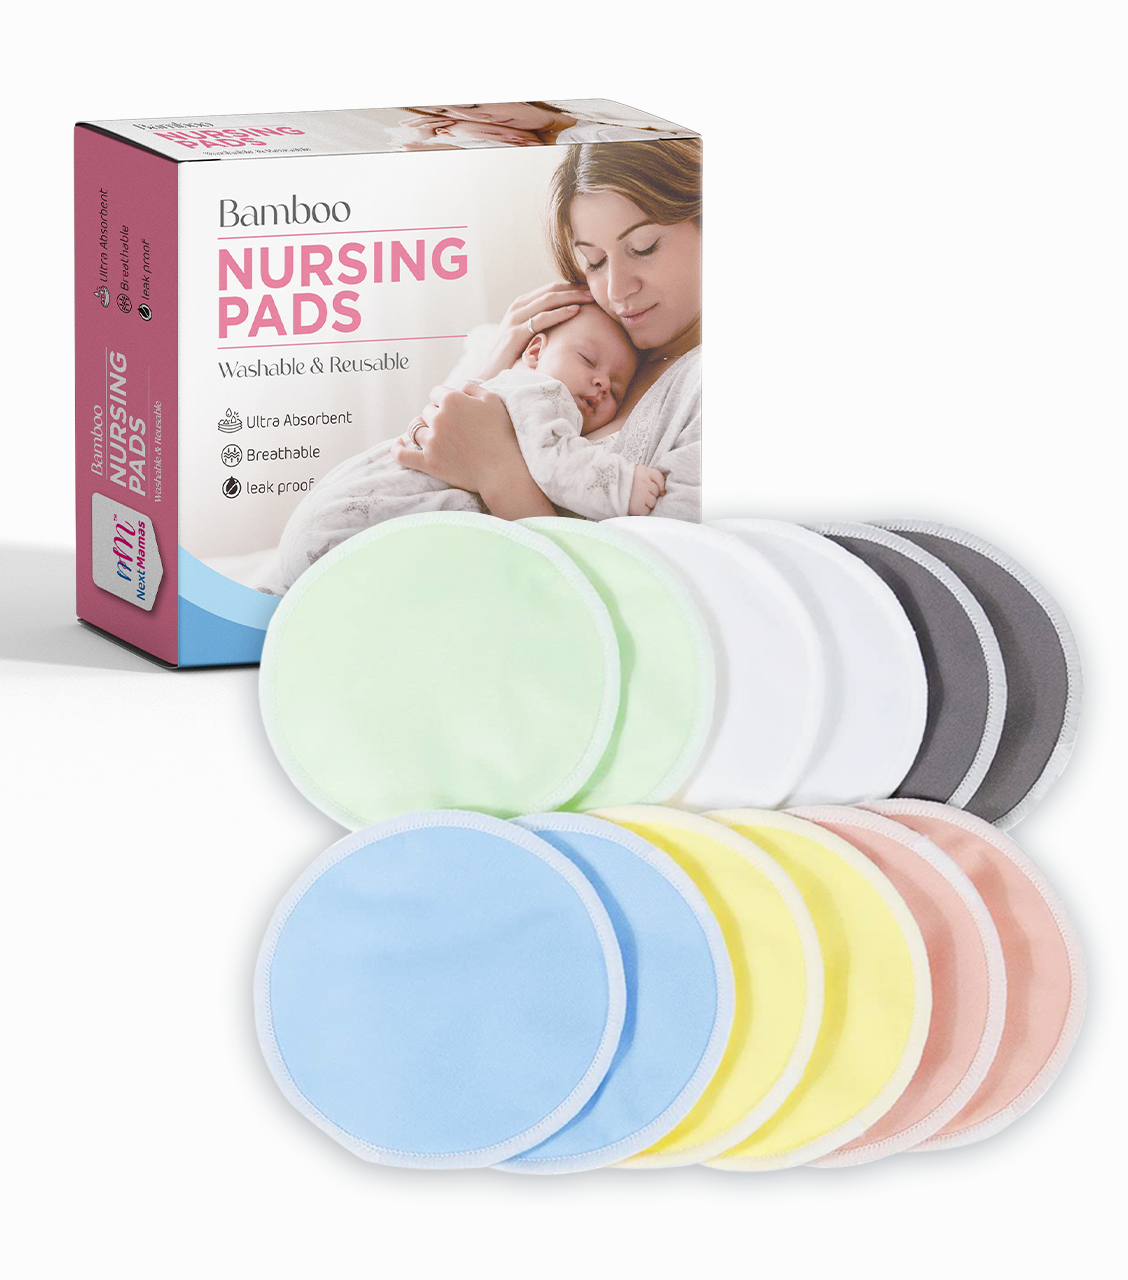 Soarwg Kids Organic Bamboo Nursing Pads for Mom, Super Absorbent Nursing  Pad Washable Reusable Breast Pads for Breastfeeding, 8 Pack with Waterproof